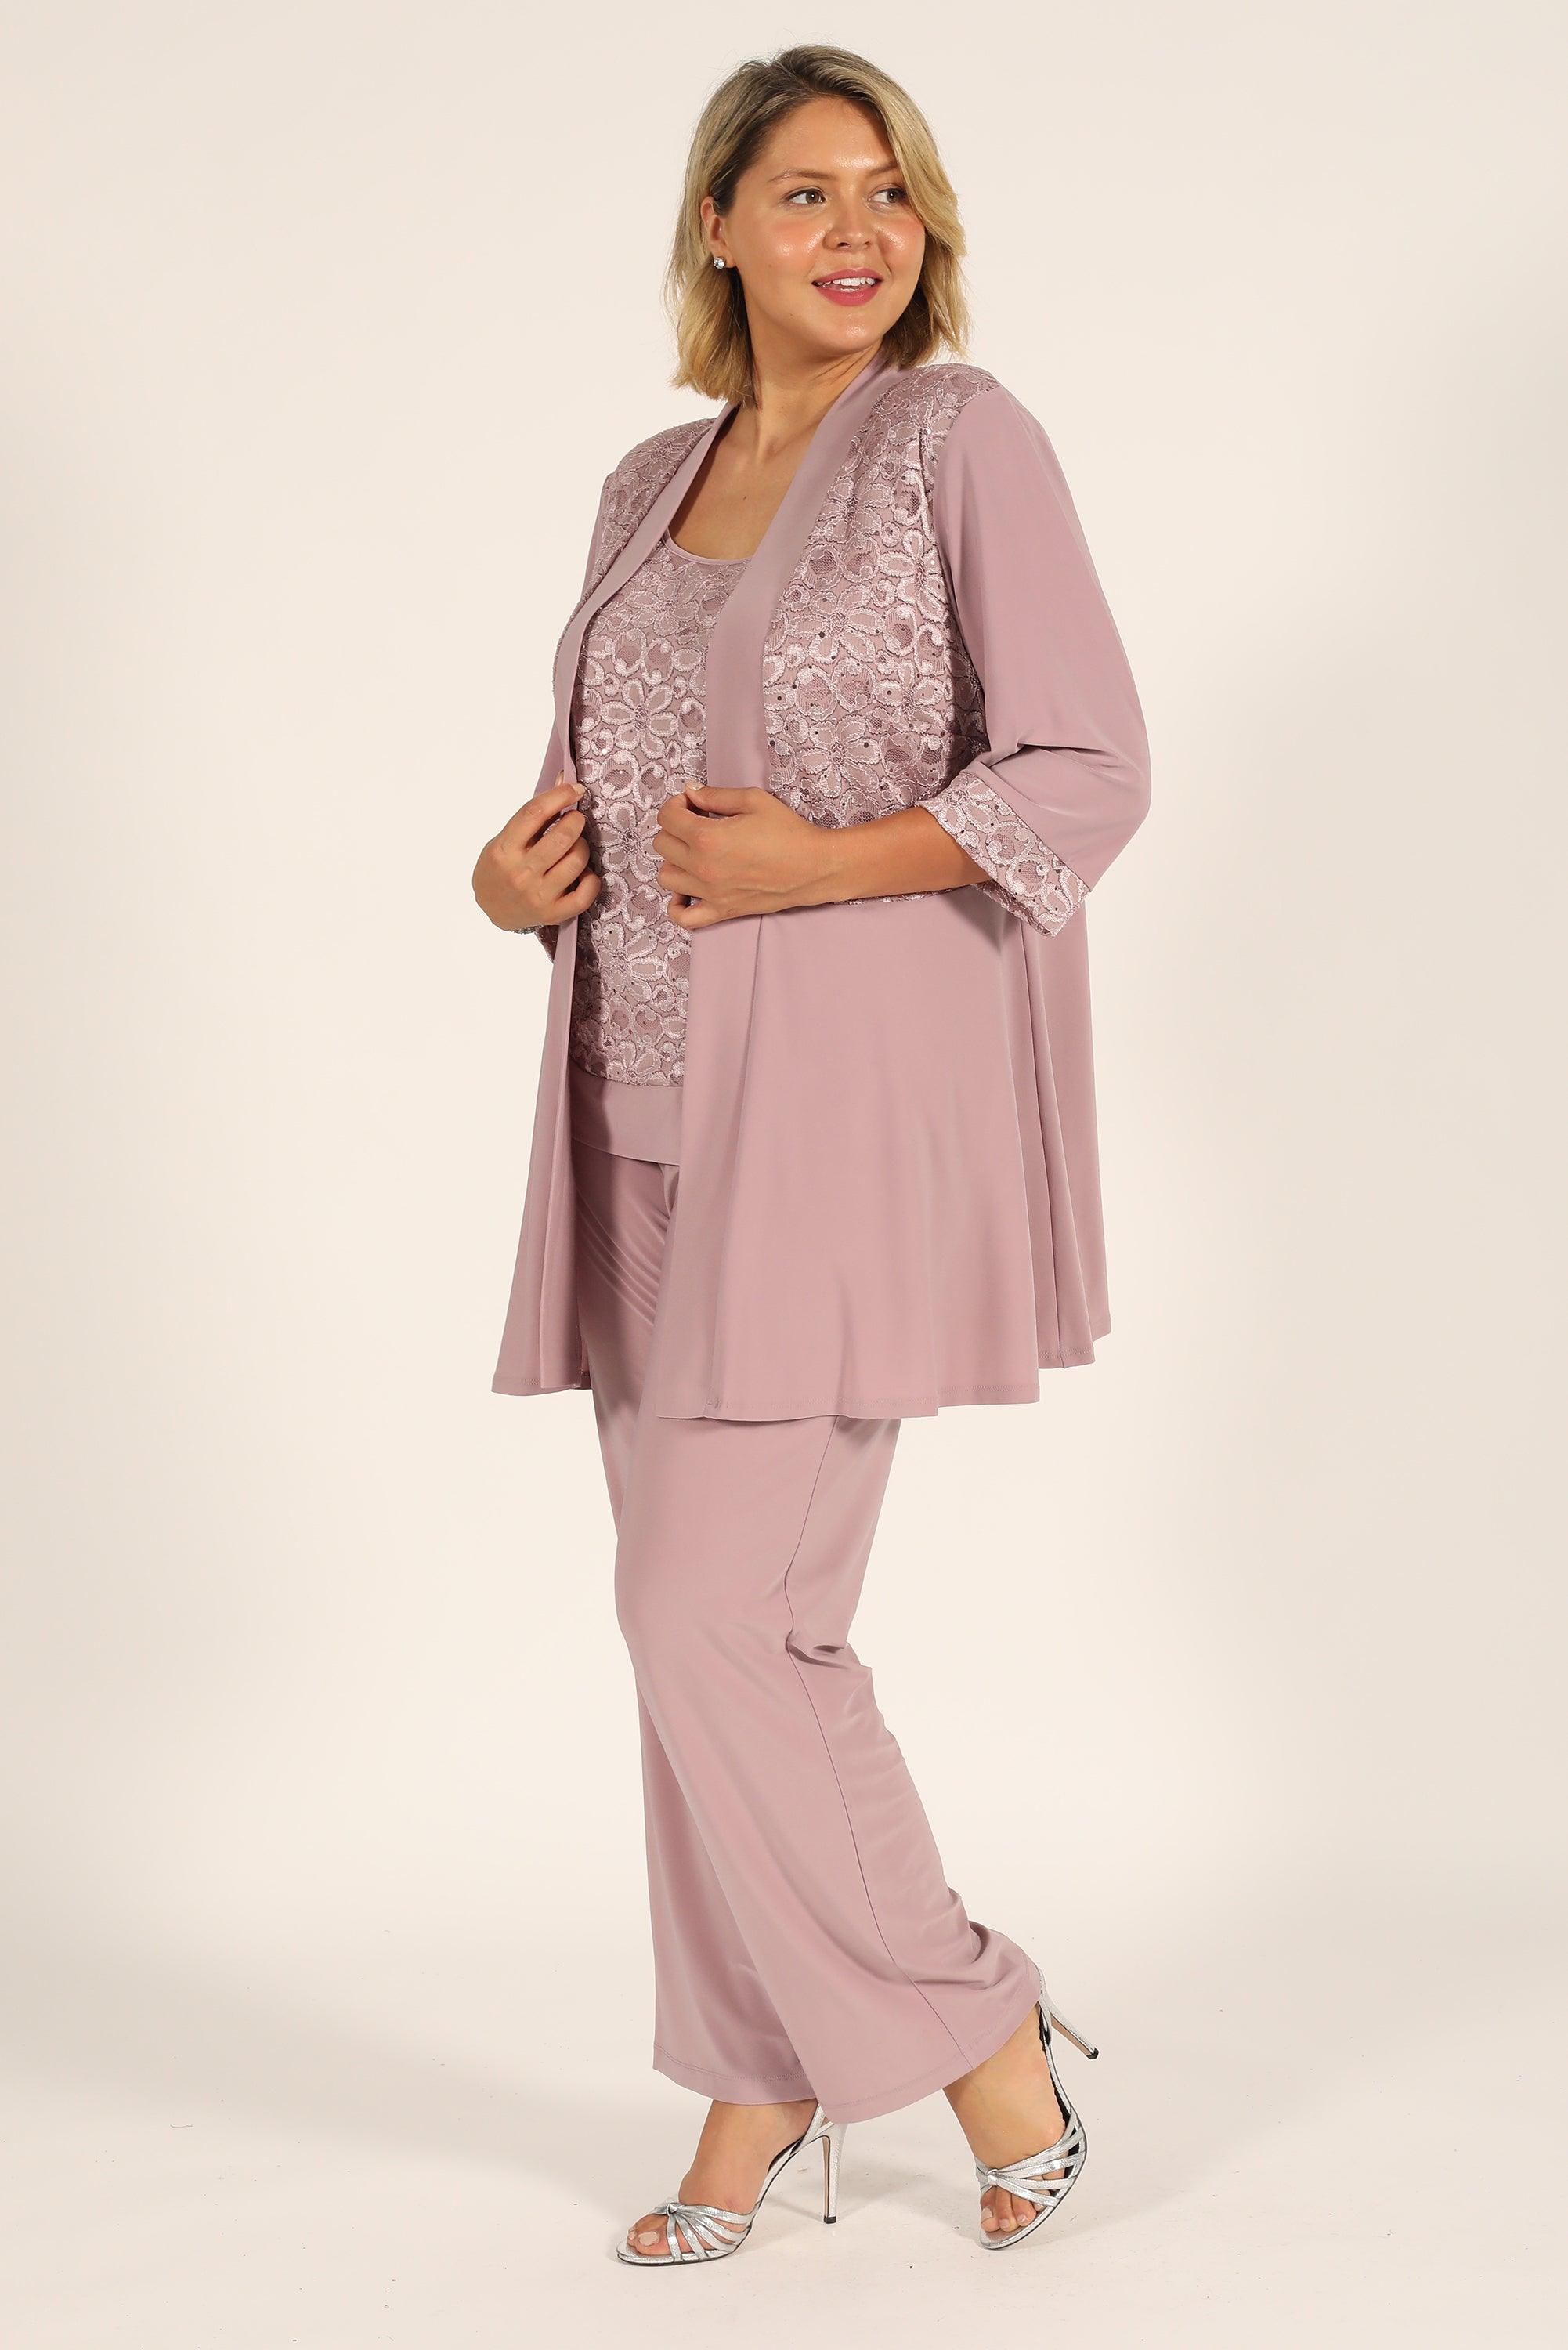 R&M Richards Mother of the Bride Formal Pant Suit 7772 - The Dress Outlet